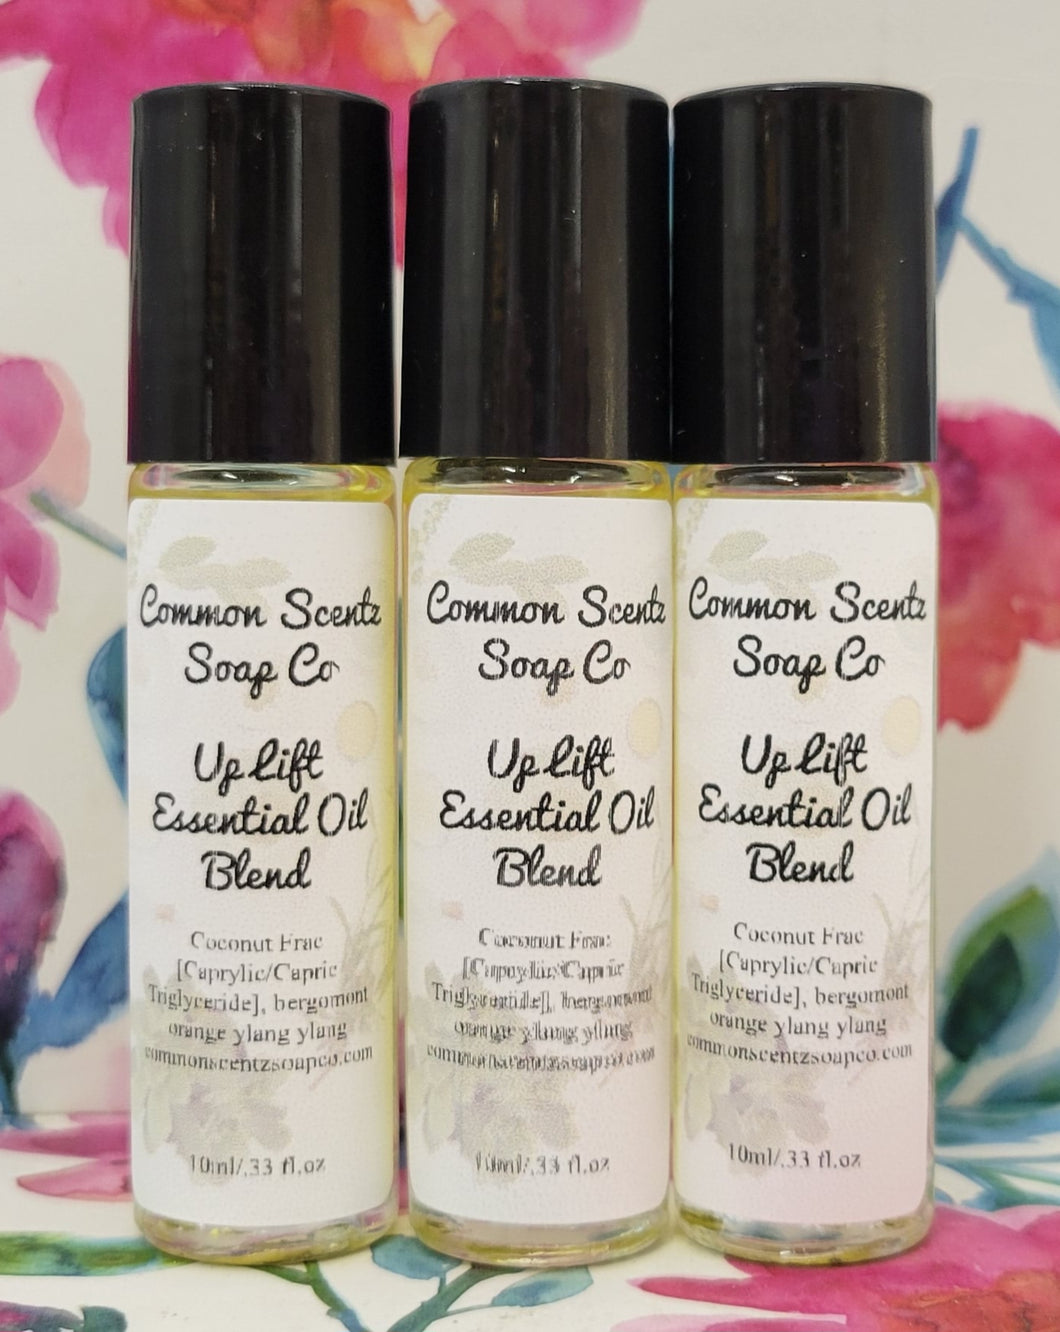 Up Lift Essential Oil Roll On